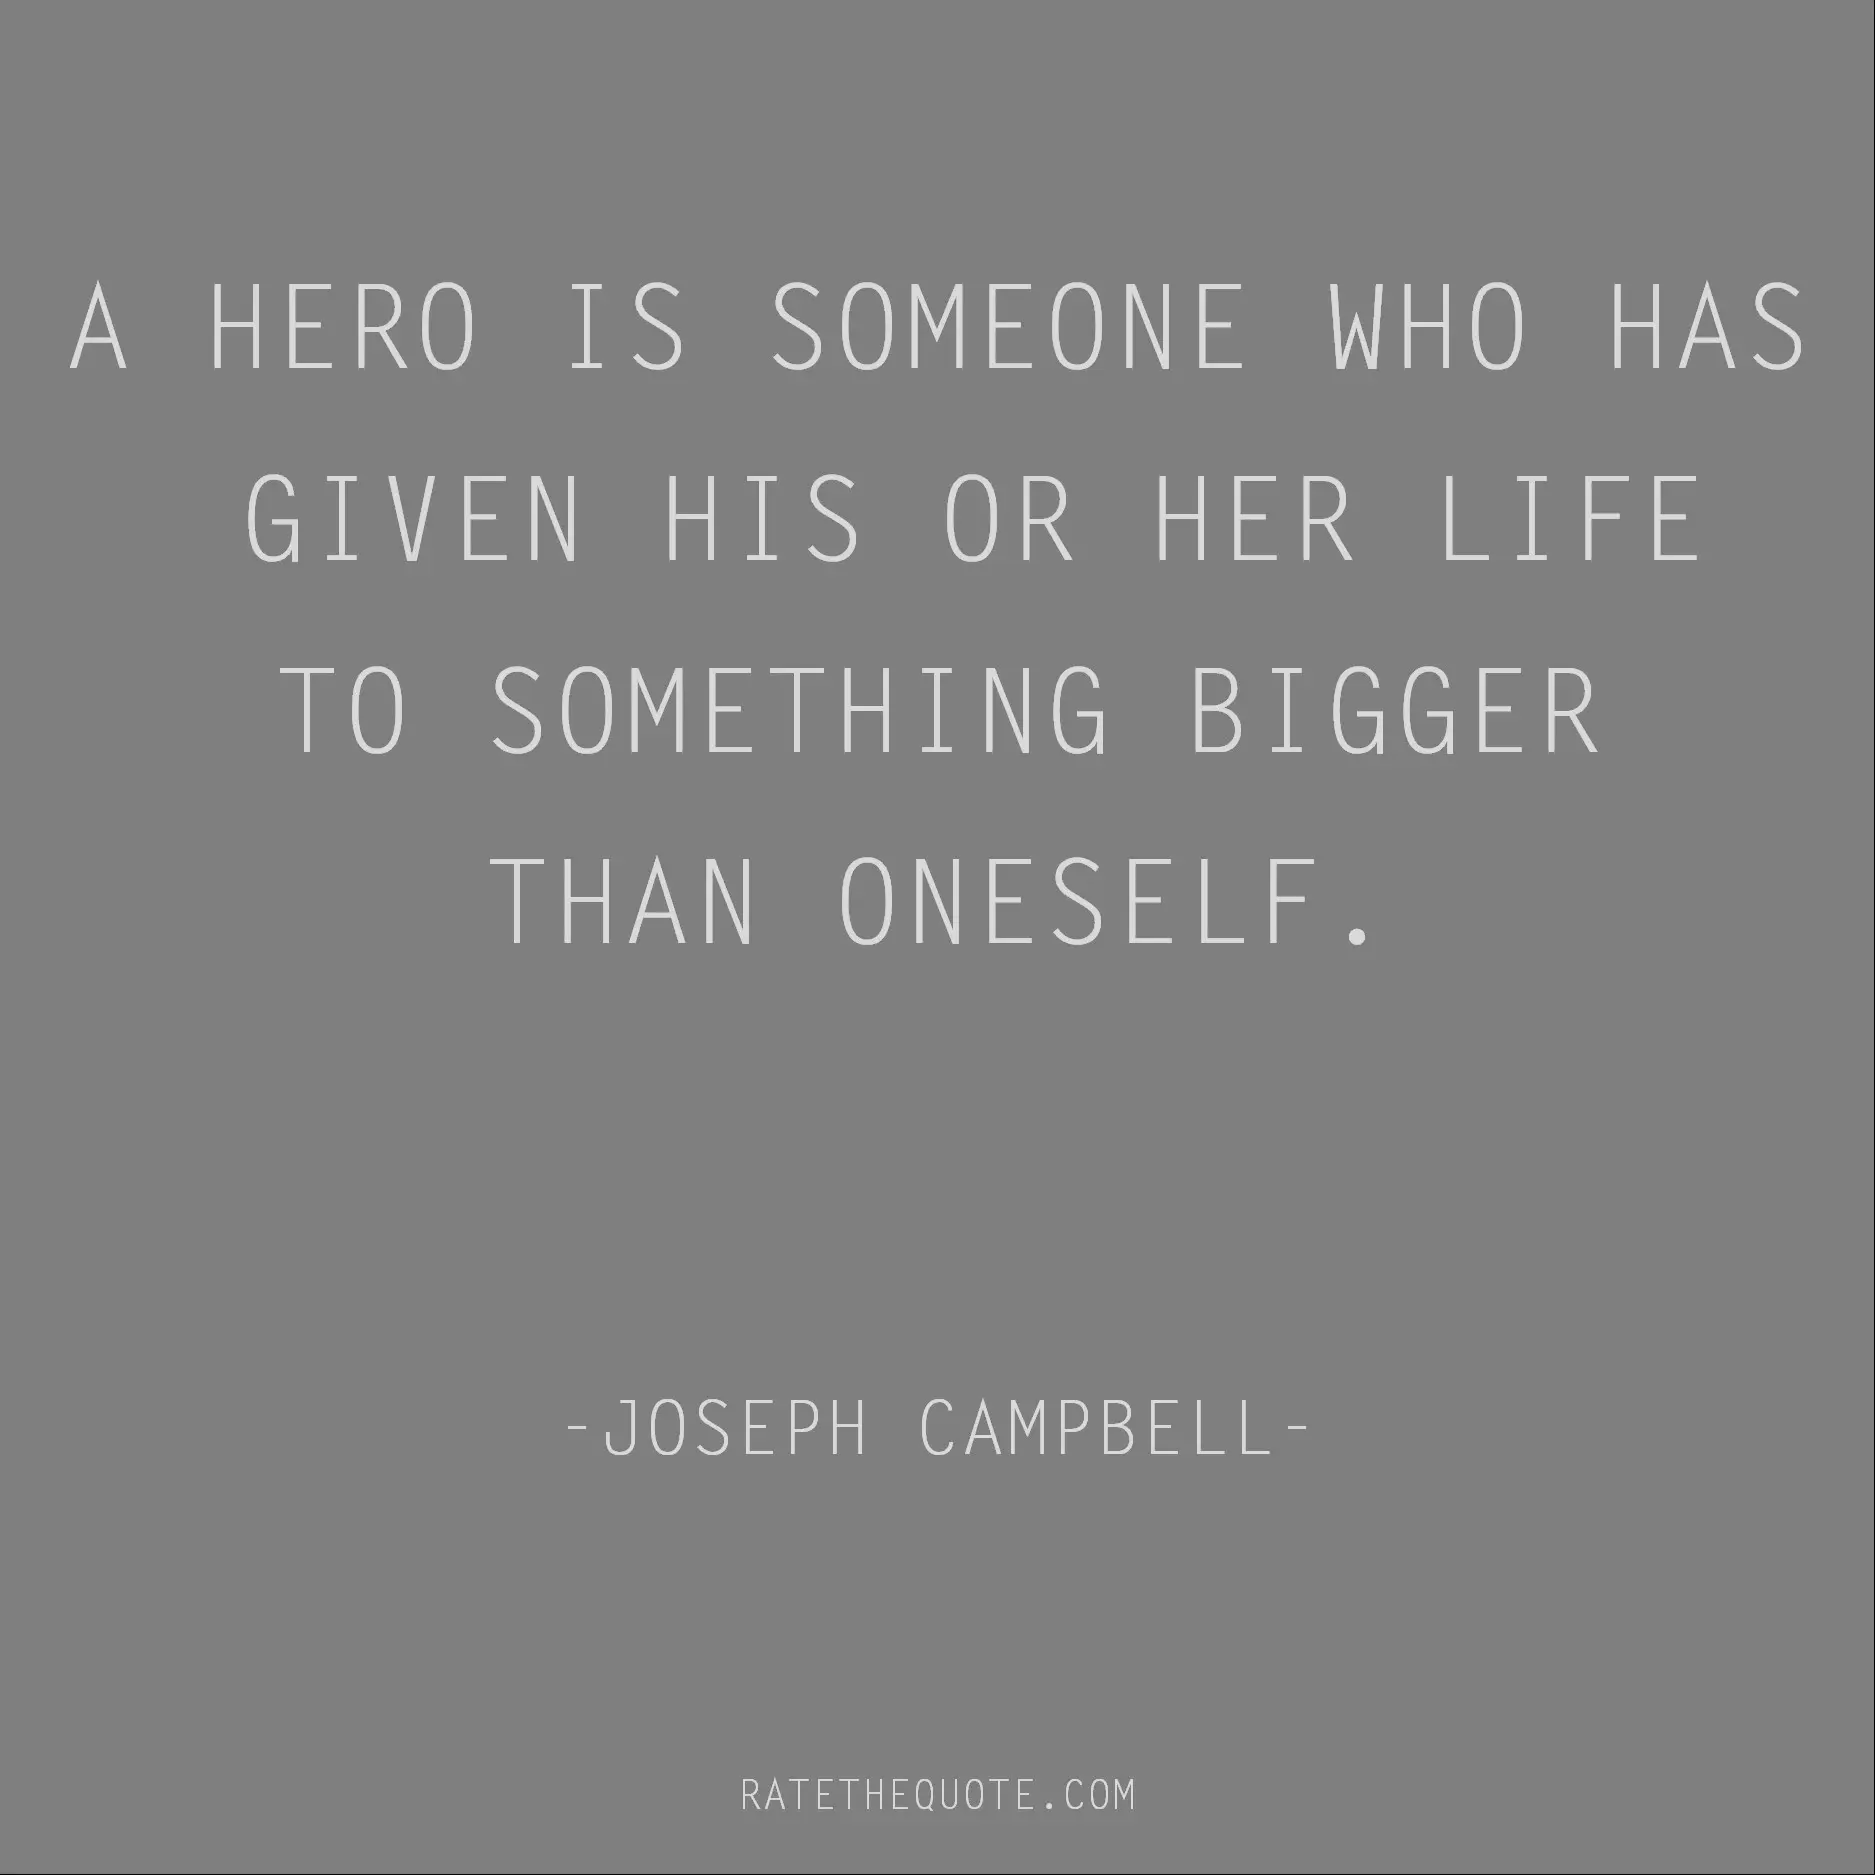 Inspirational Quotes A hero is someone who has given his or her life to something bigger than oneself. Joseph Campbell